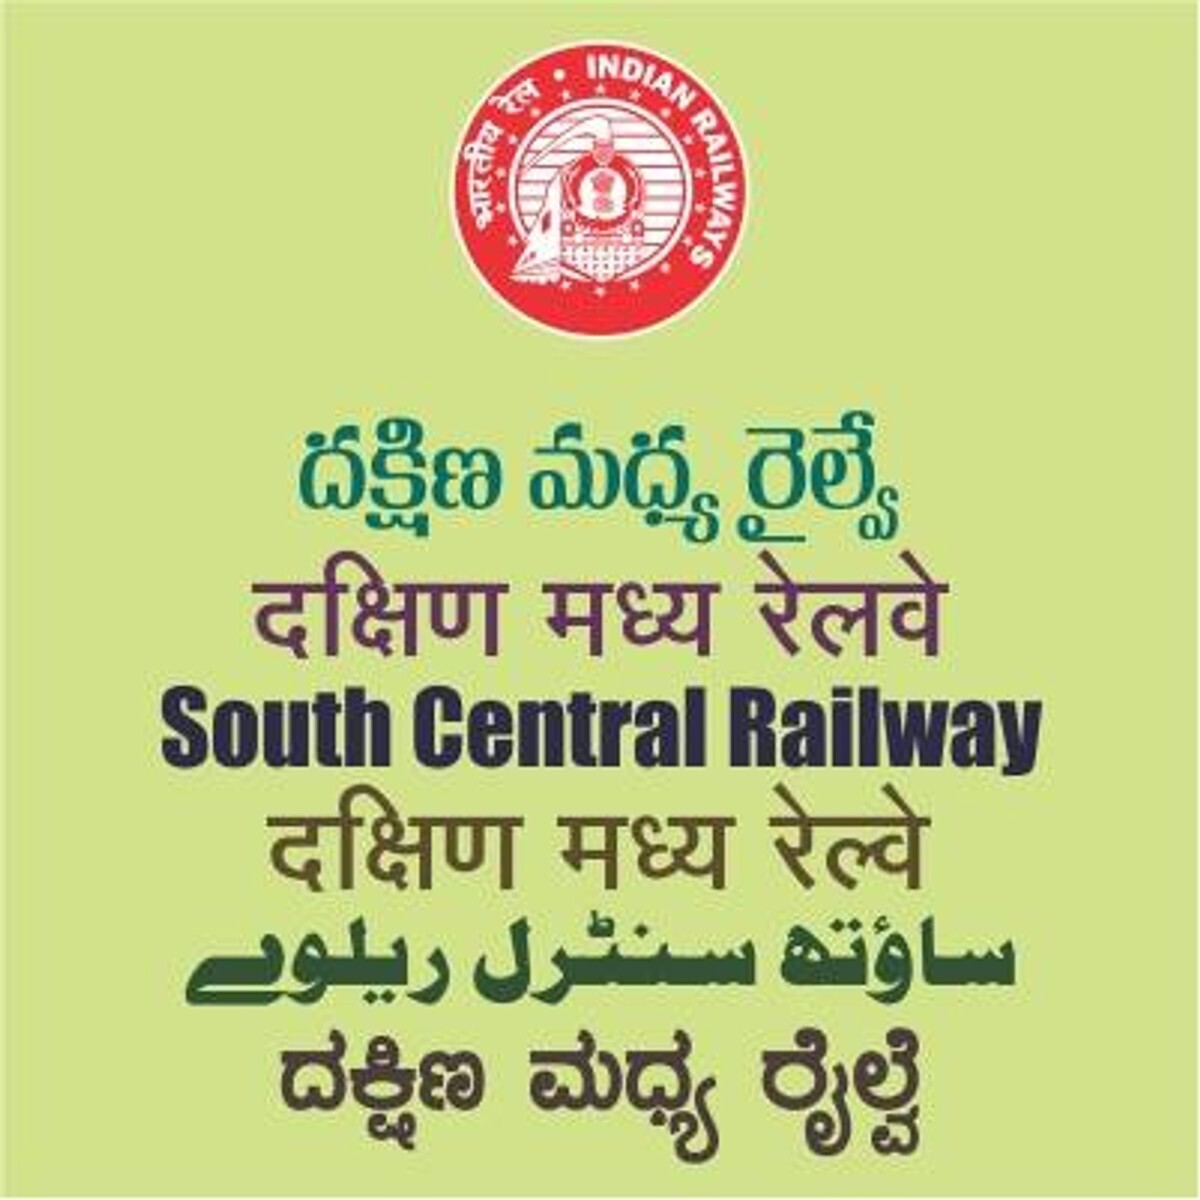 South Central Railway photo